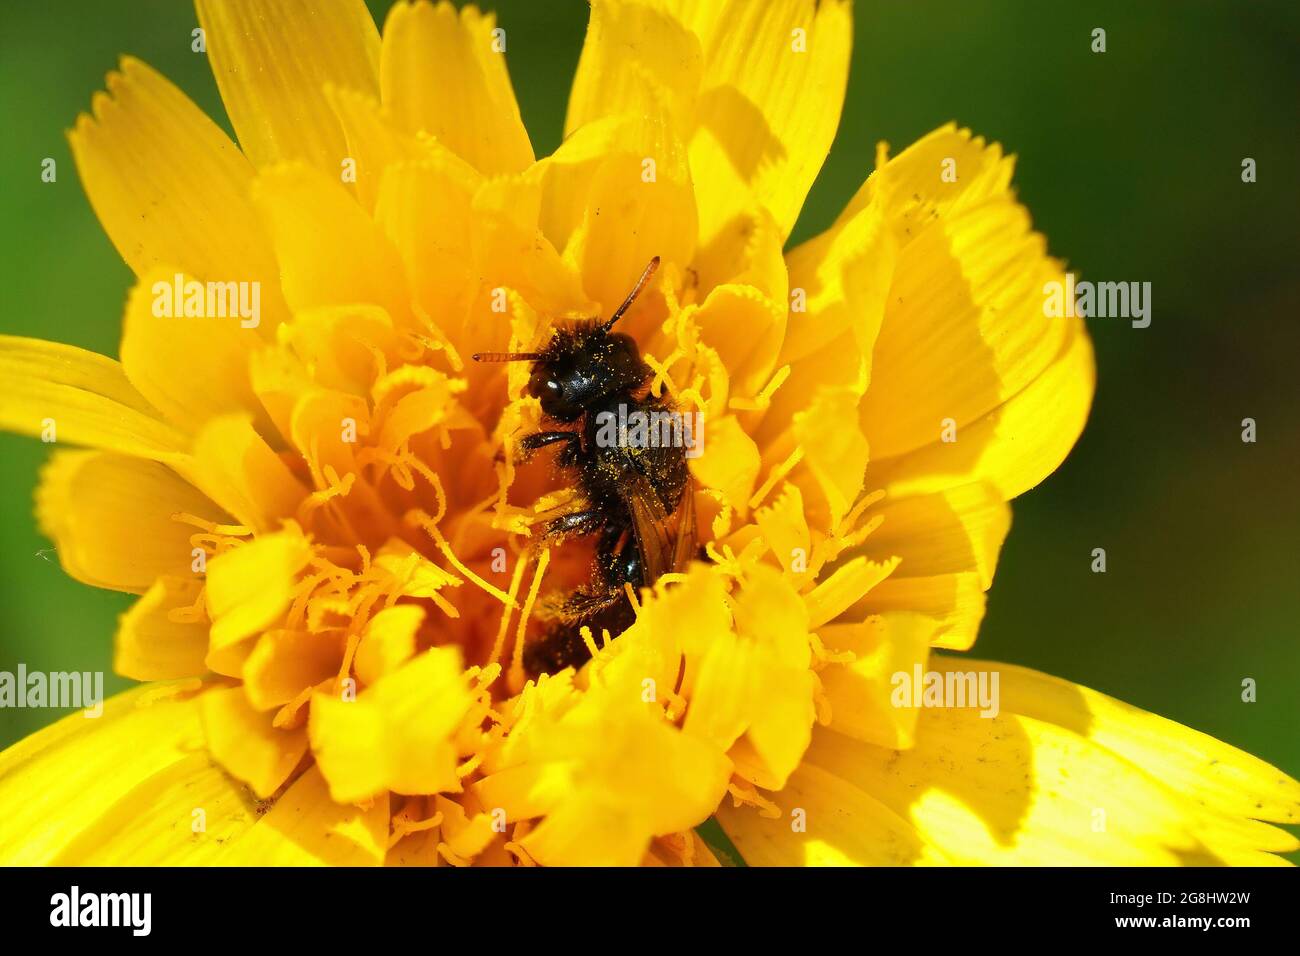 Closeup of a shaggy bee pollinating on the yellow flatweed flower Stock Photo